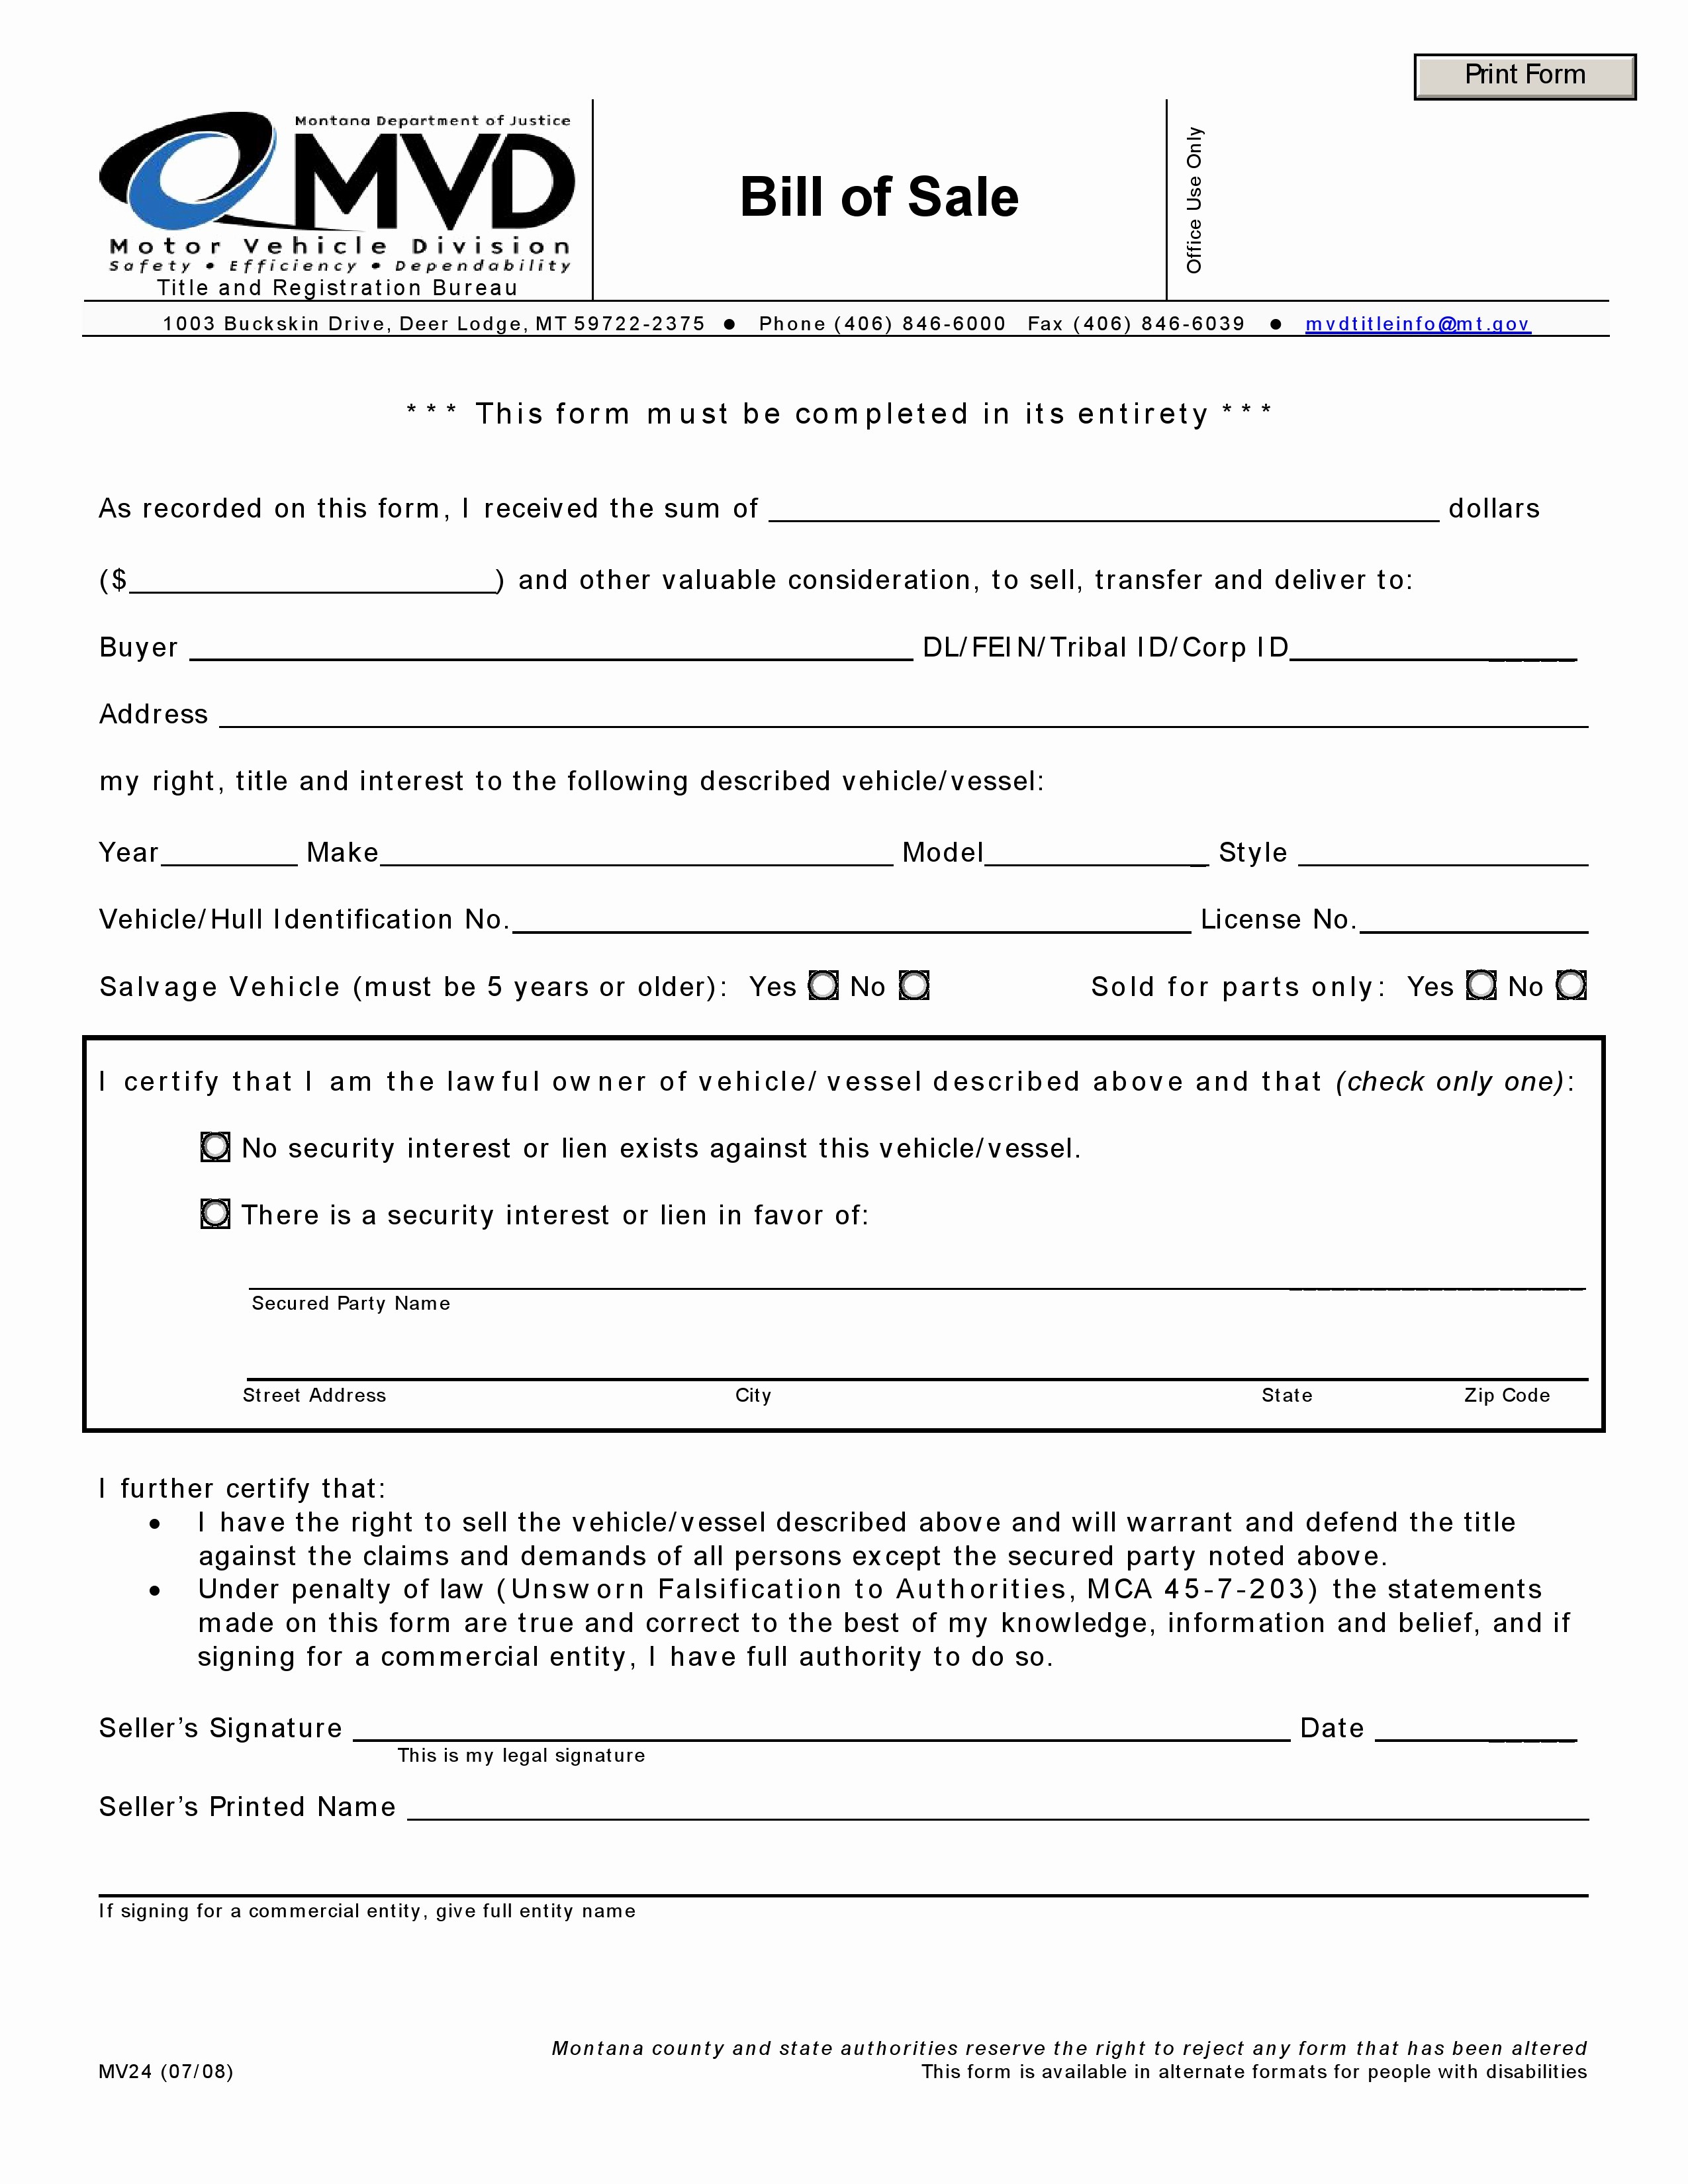 Form Of Bill Of Sale New Free Montana Vehicle Bill Of Sale form Pdf Word